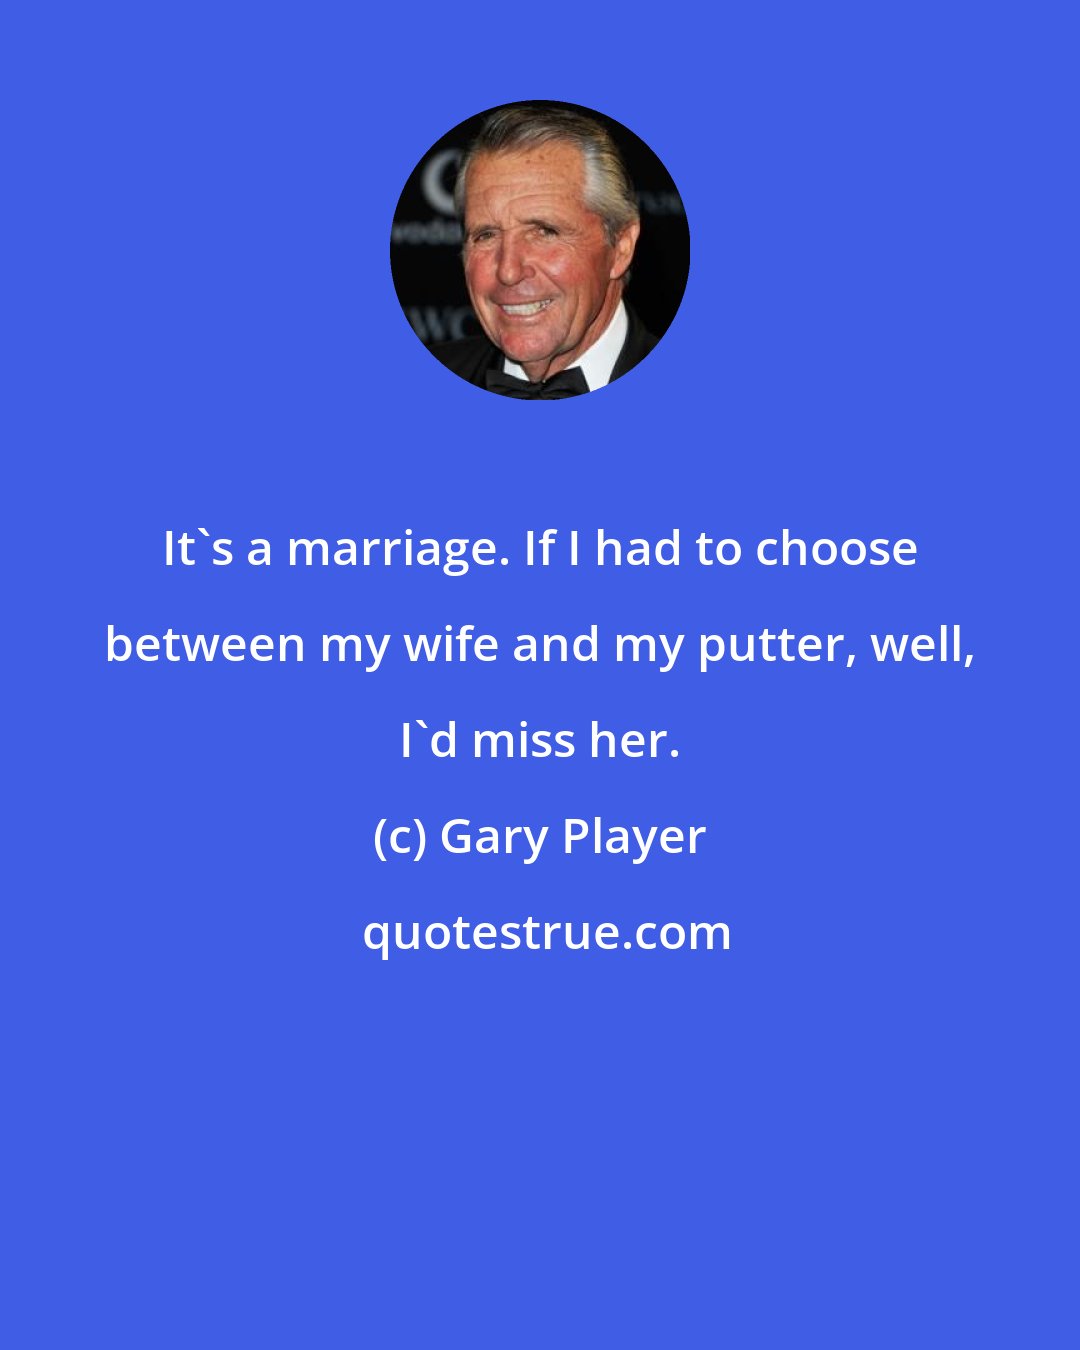 Gary Player: It's a marriage. If I had to choose between my wife and my putter, well, I'd miss her.